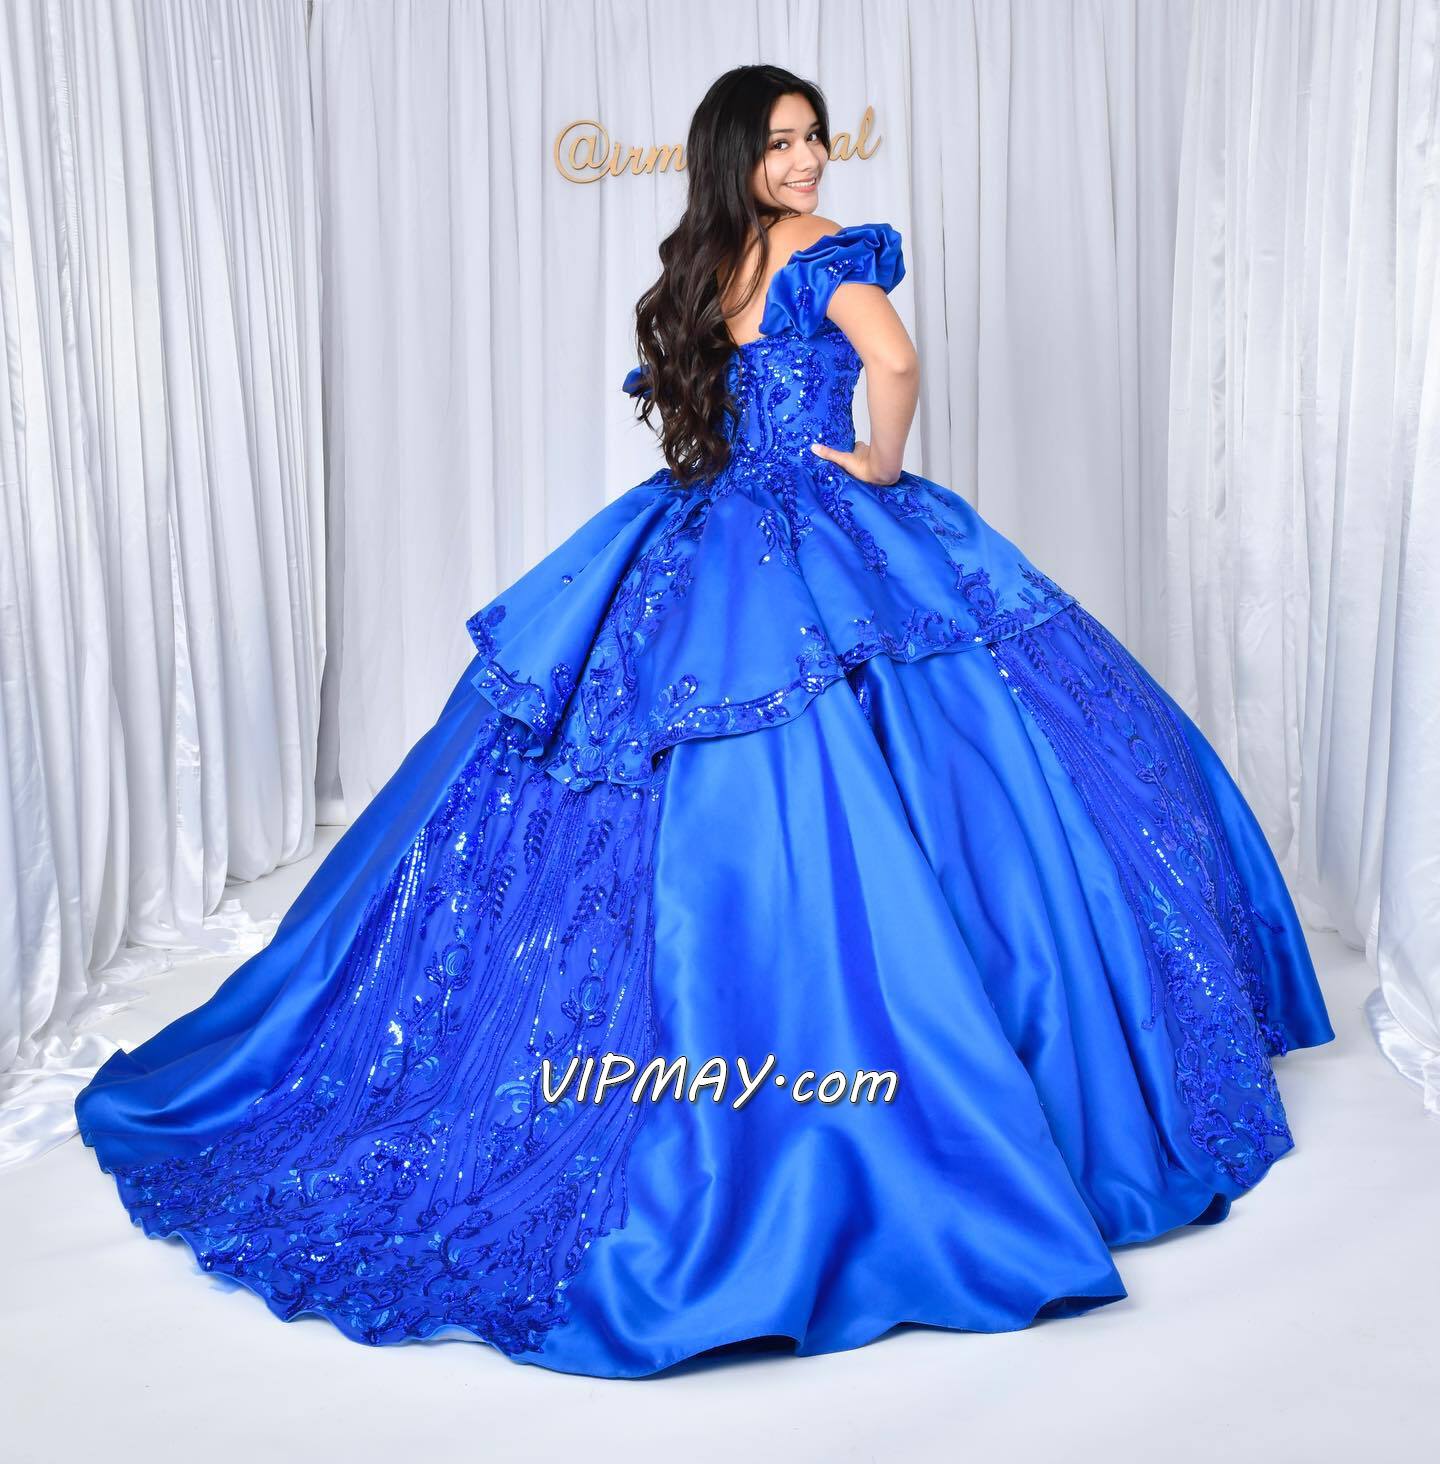 royal blue sweet 16 dress,royal blue quinceanera dress,sequin ball gown charro quinceanera dress,sequined quinceanera dress,quinceanera dress satin layers,cap sleeves quinceanera dress,quinceanera dress with a train,sparkly quinceanera dress,sweetheart sweet sixteen dress,sweetheart neckline quinceanera dress,wholesale quinceanera dress from china,quinceanera dress discount prices,modest and elegant quinceanera dress,quinceanera dress free shipping,